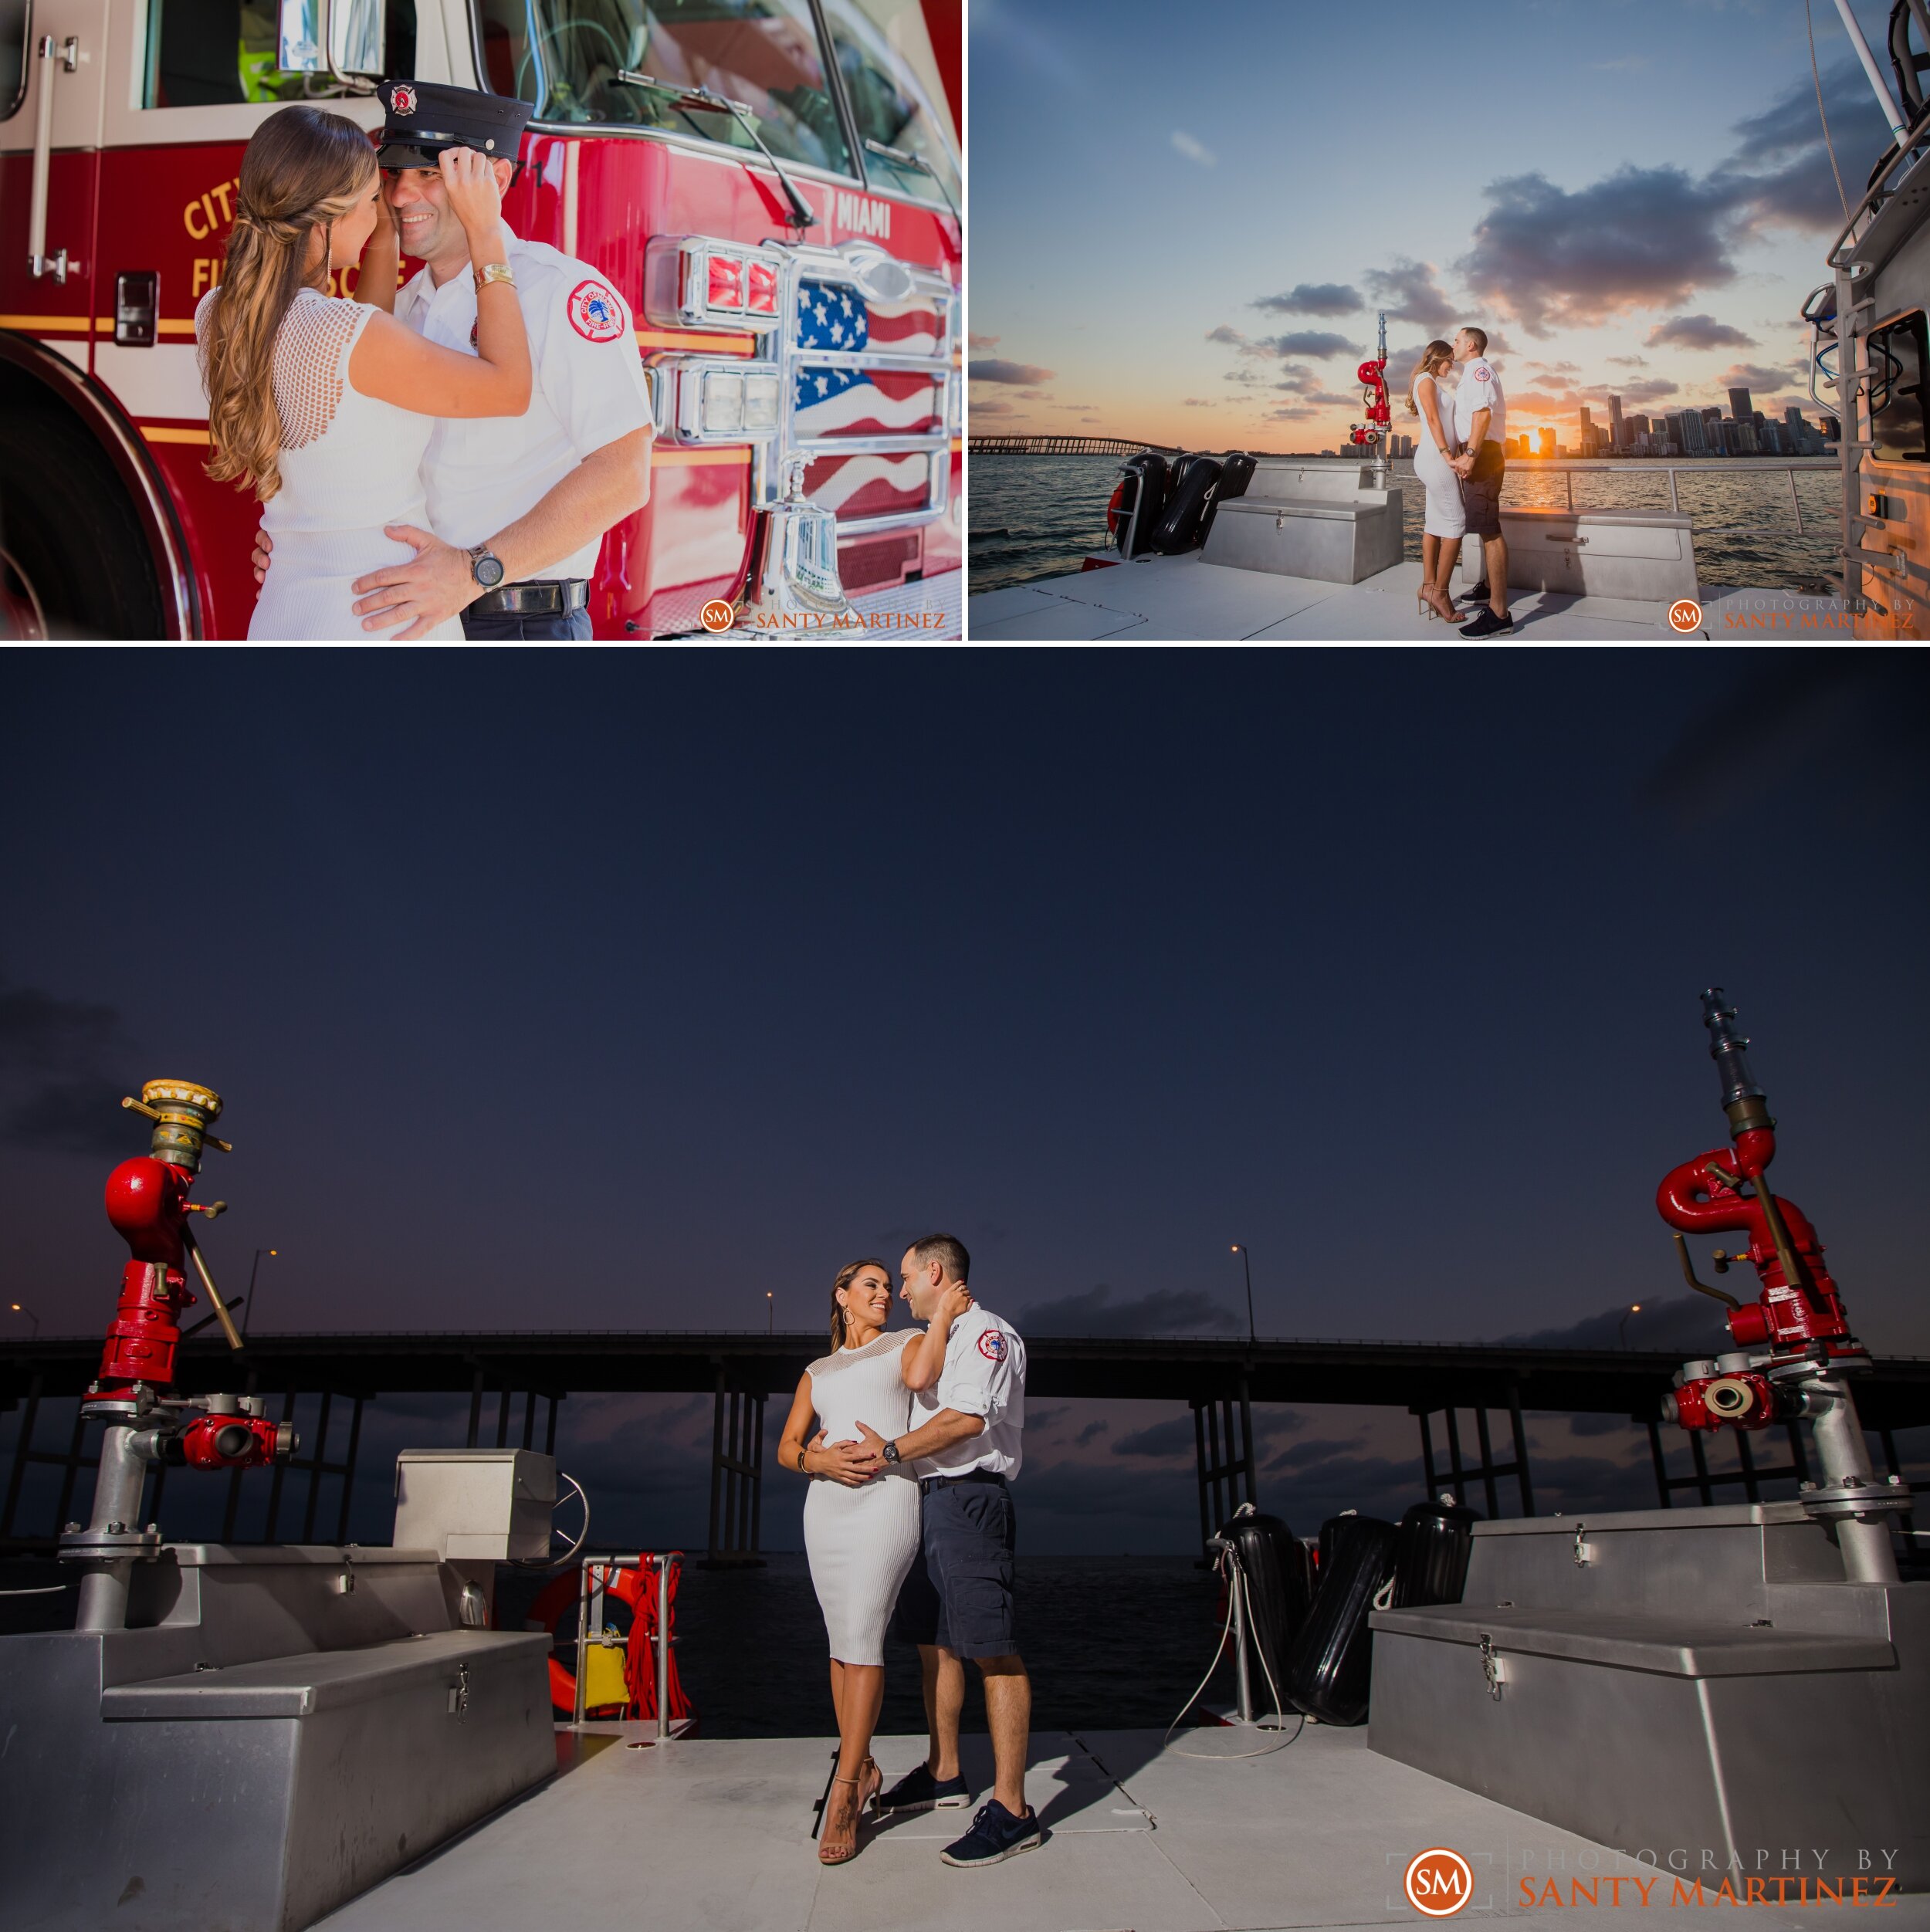 Firefighter Engagement Session Miami - Photography by Santy Martinez 8.jpg